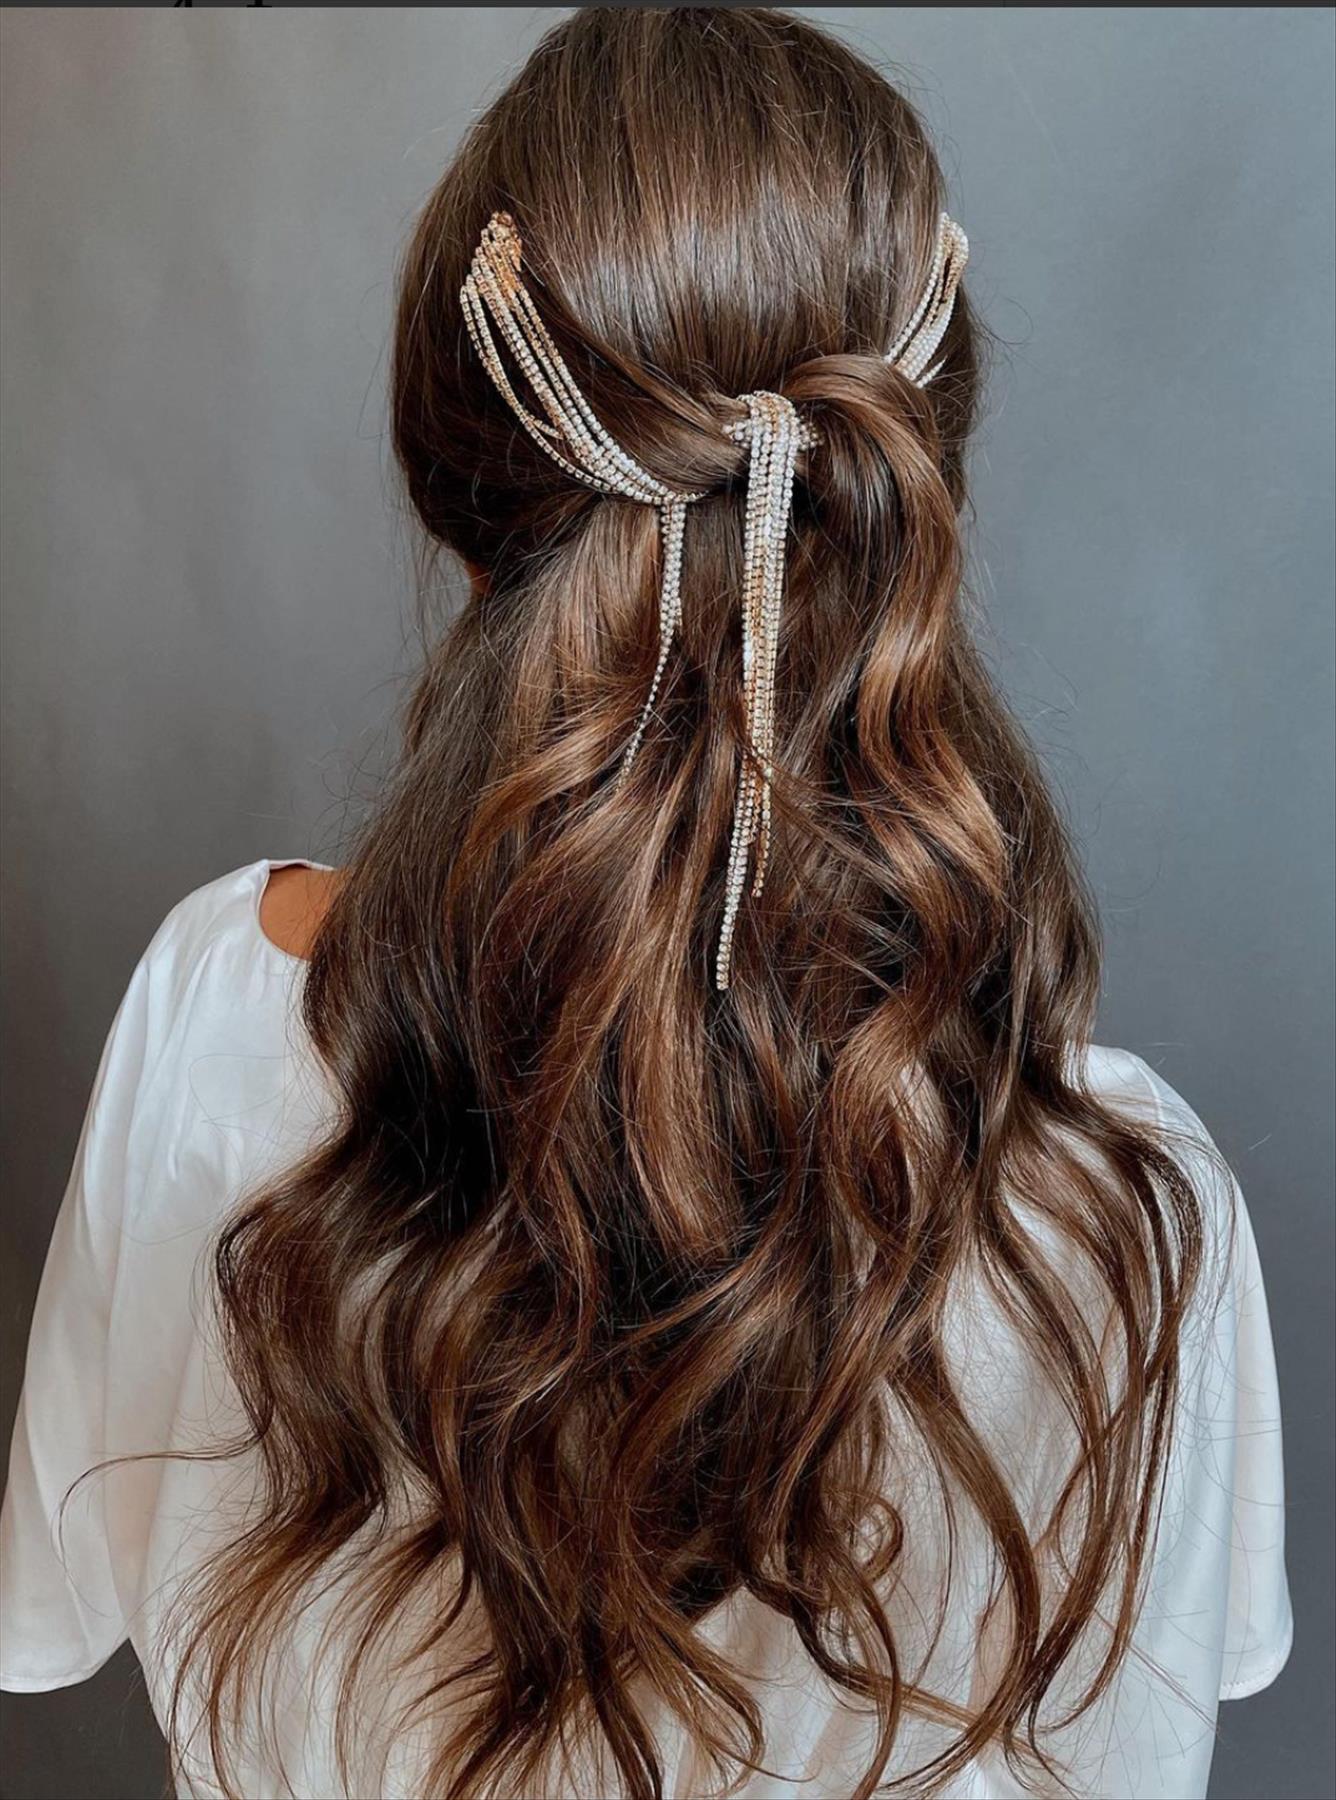 Stunning Prom Updos for Long Hair in 2022 to Steal the Show